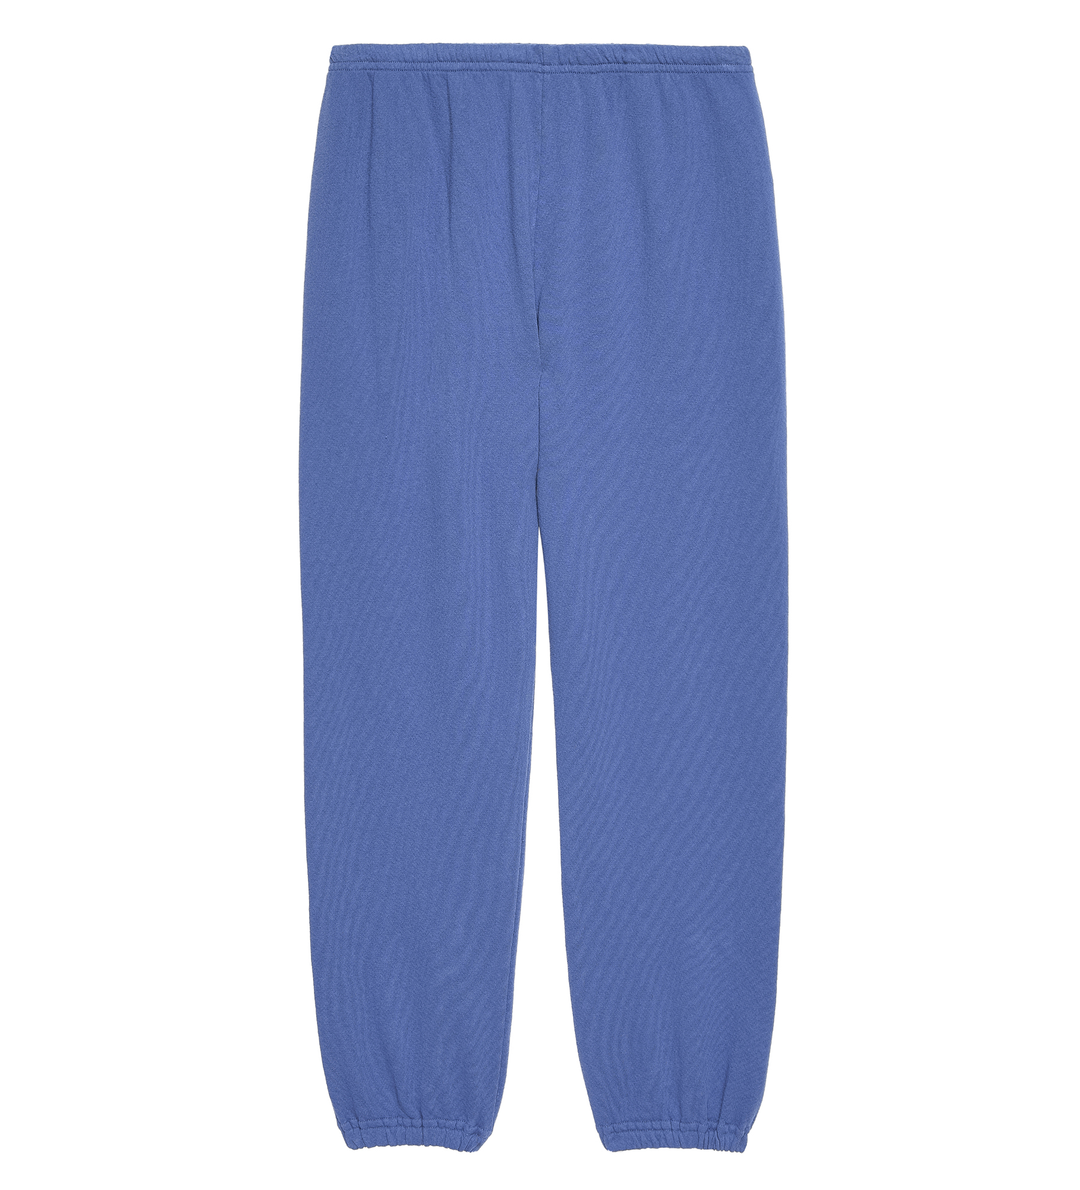 The Great - The Stadium Sweatpant in Glacier Blue